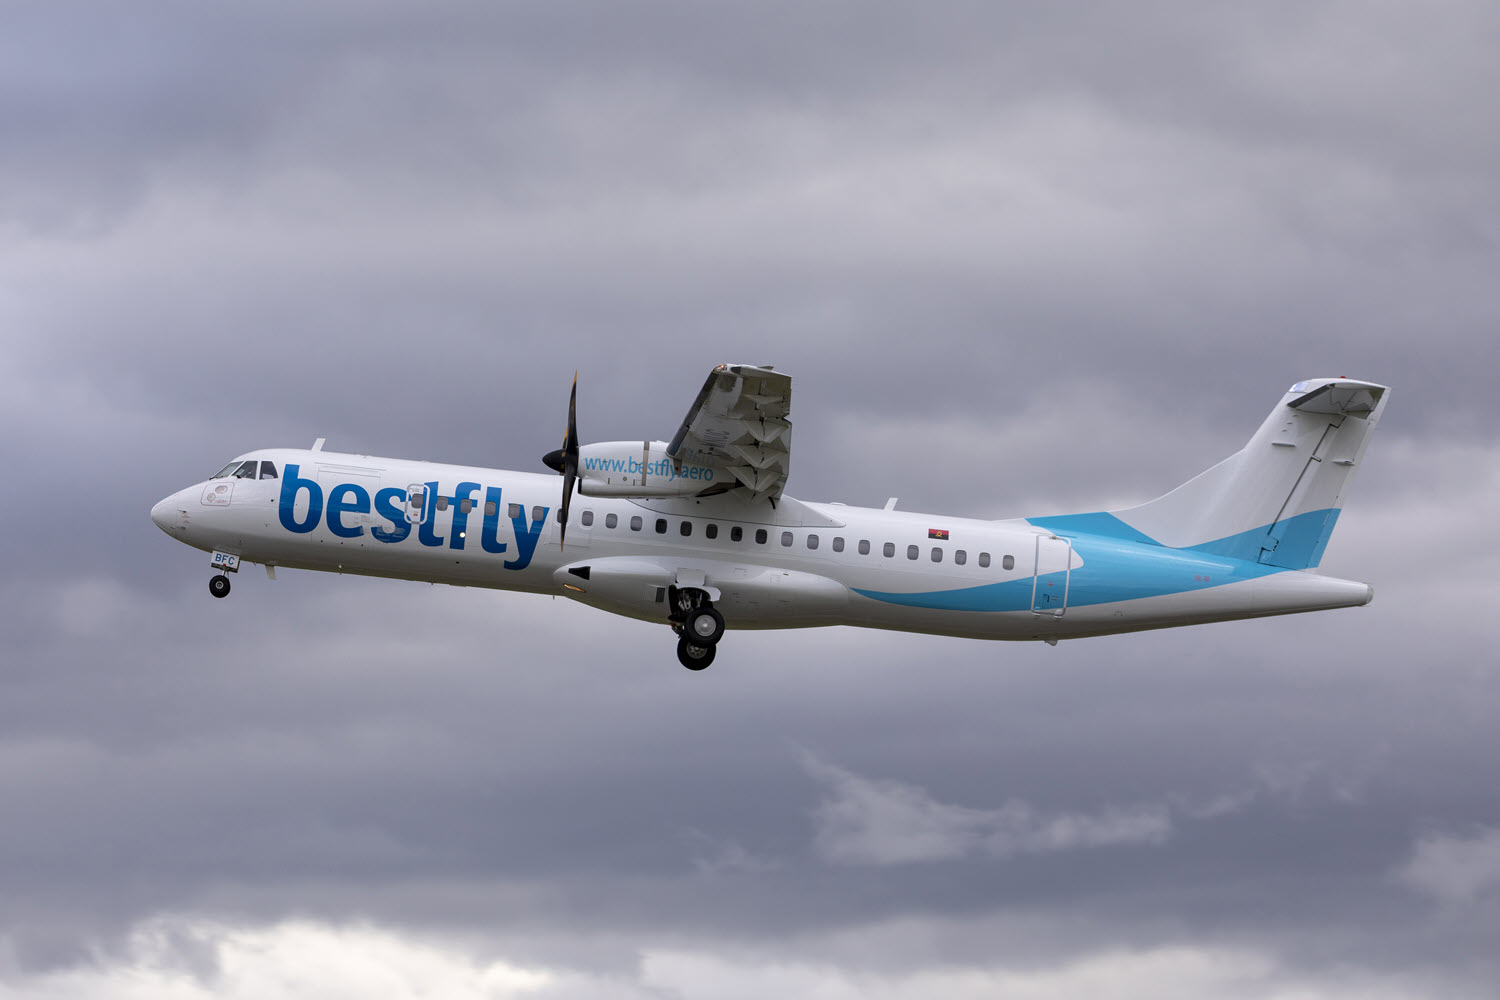 Angolan private airline Bestfly leases two ATR 72-600s from Acia Aero